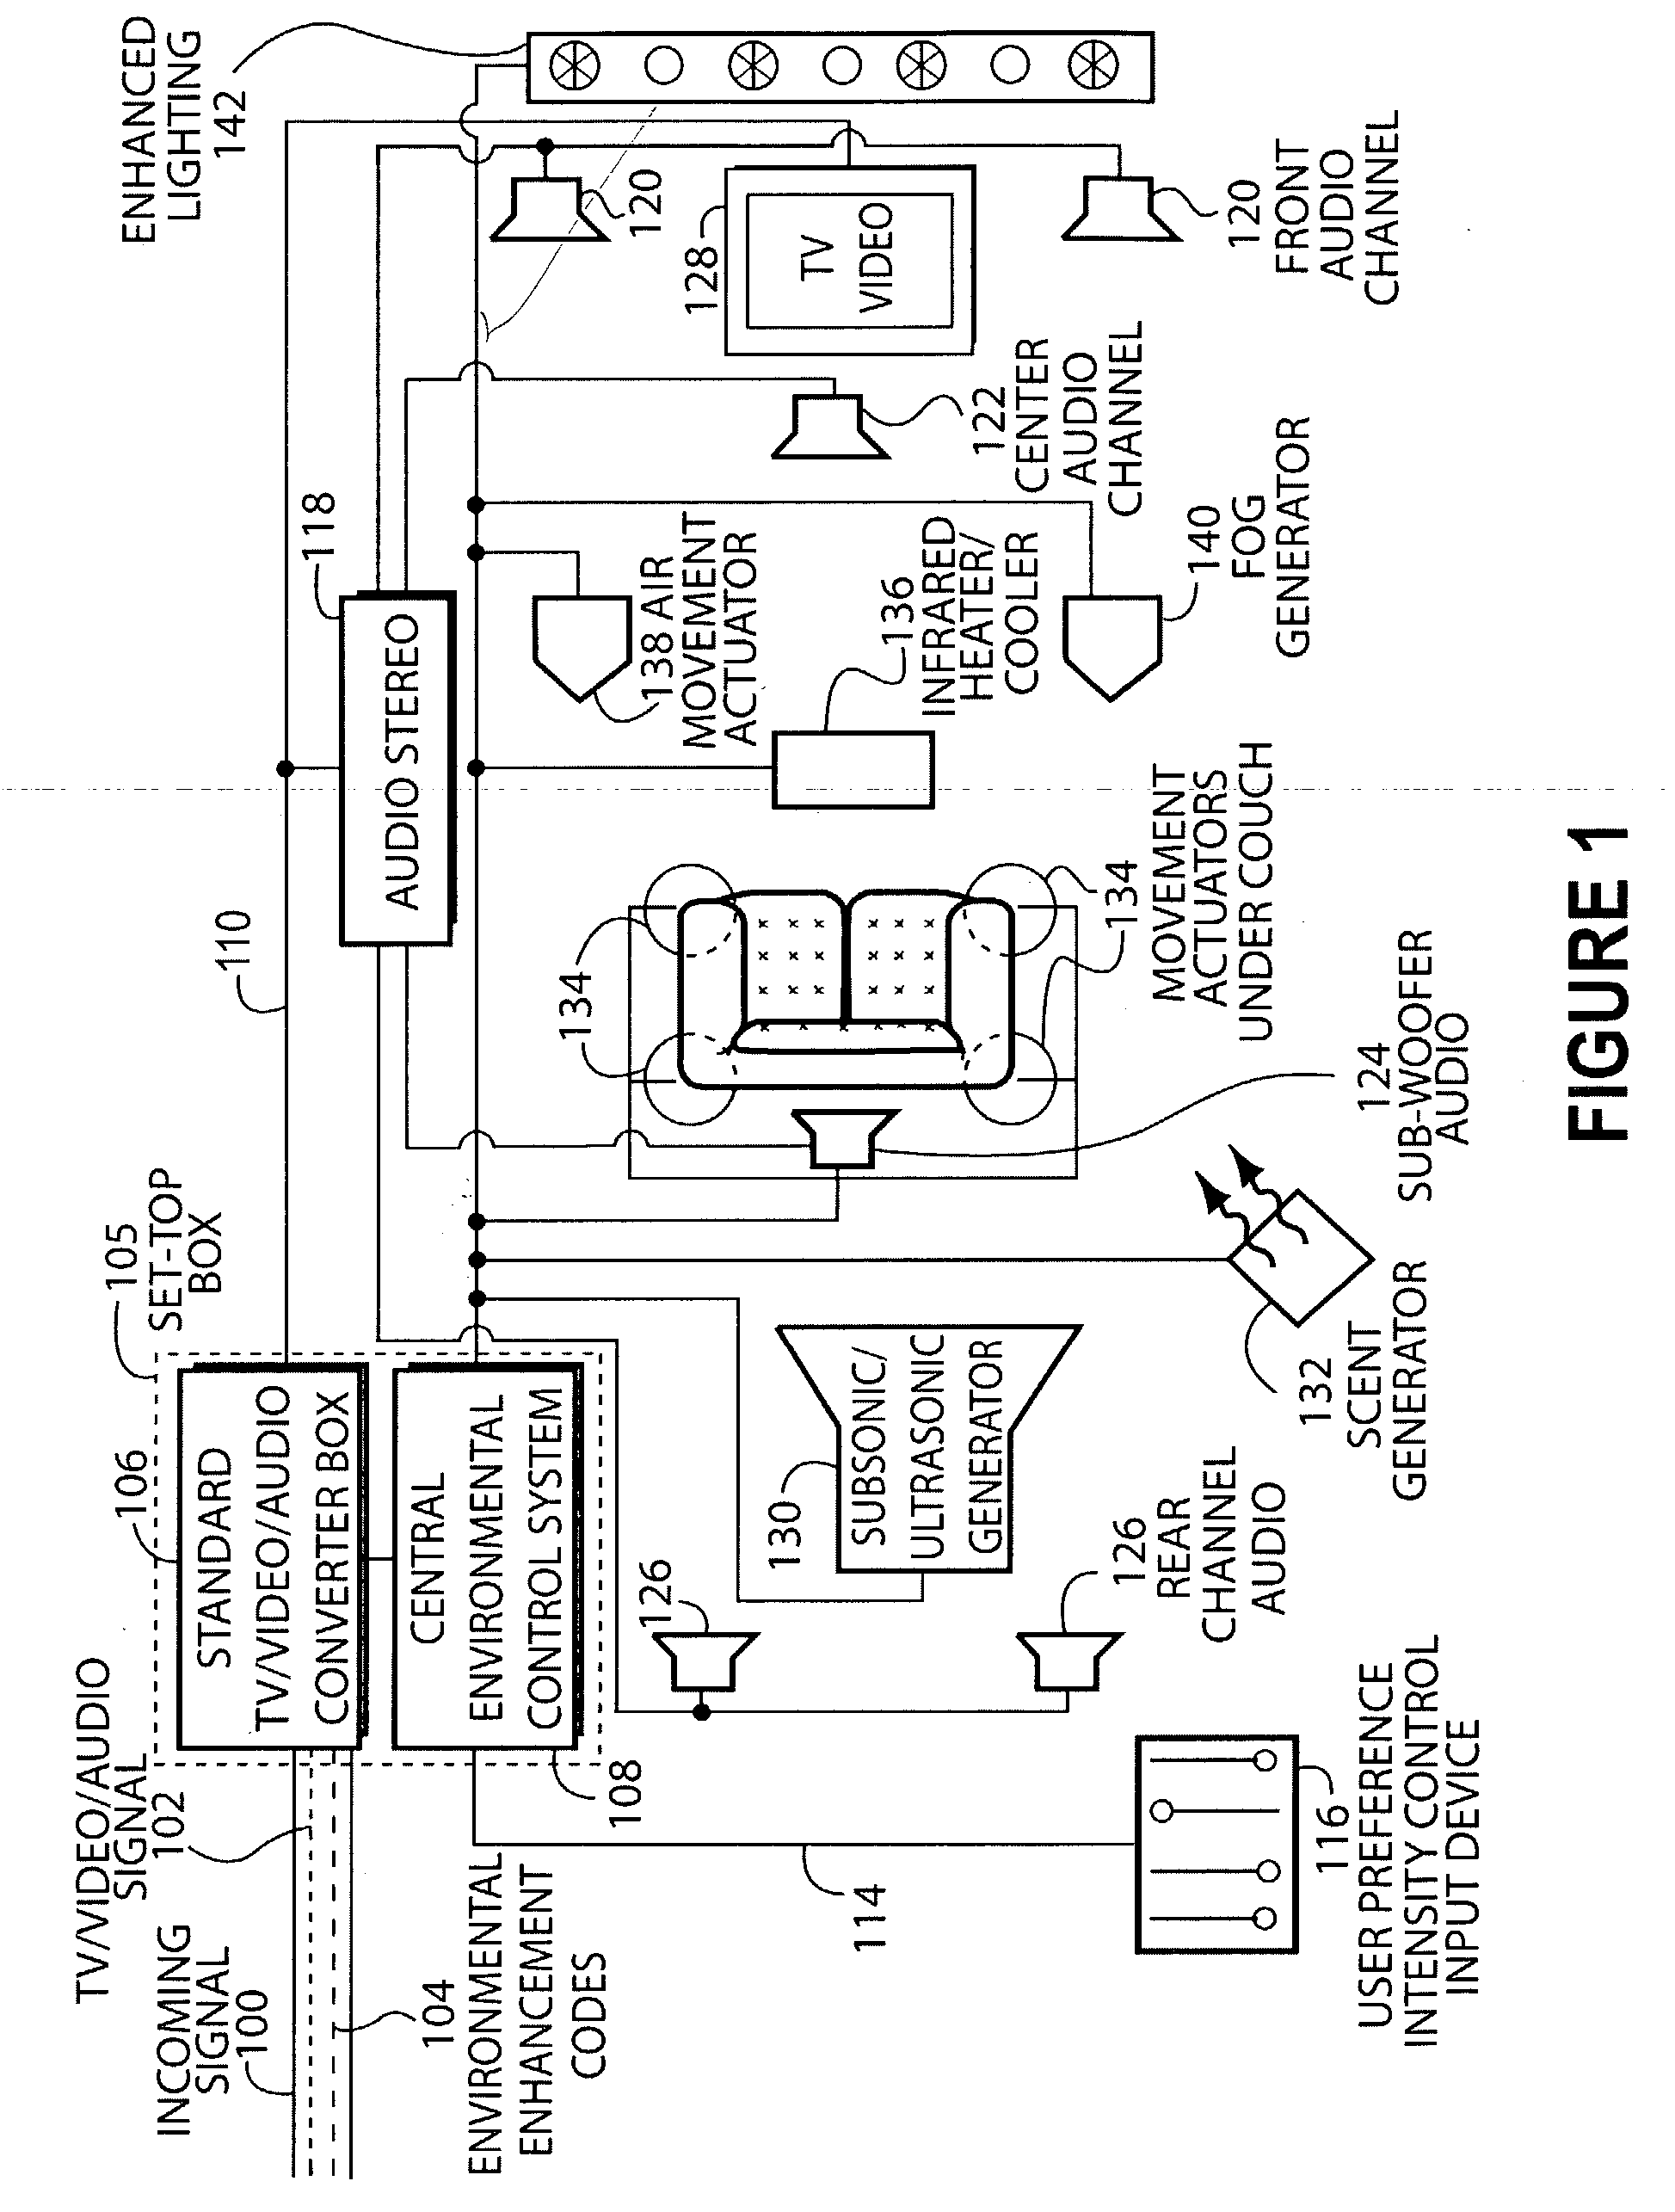 Method and apparatus for a data receiver and controller for the facilitation of an enhanced television viewing environment